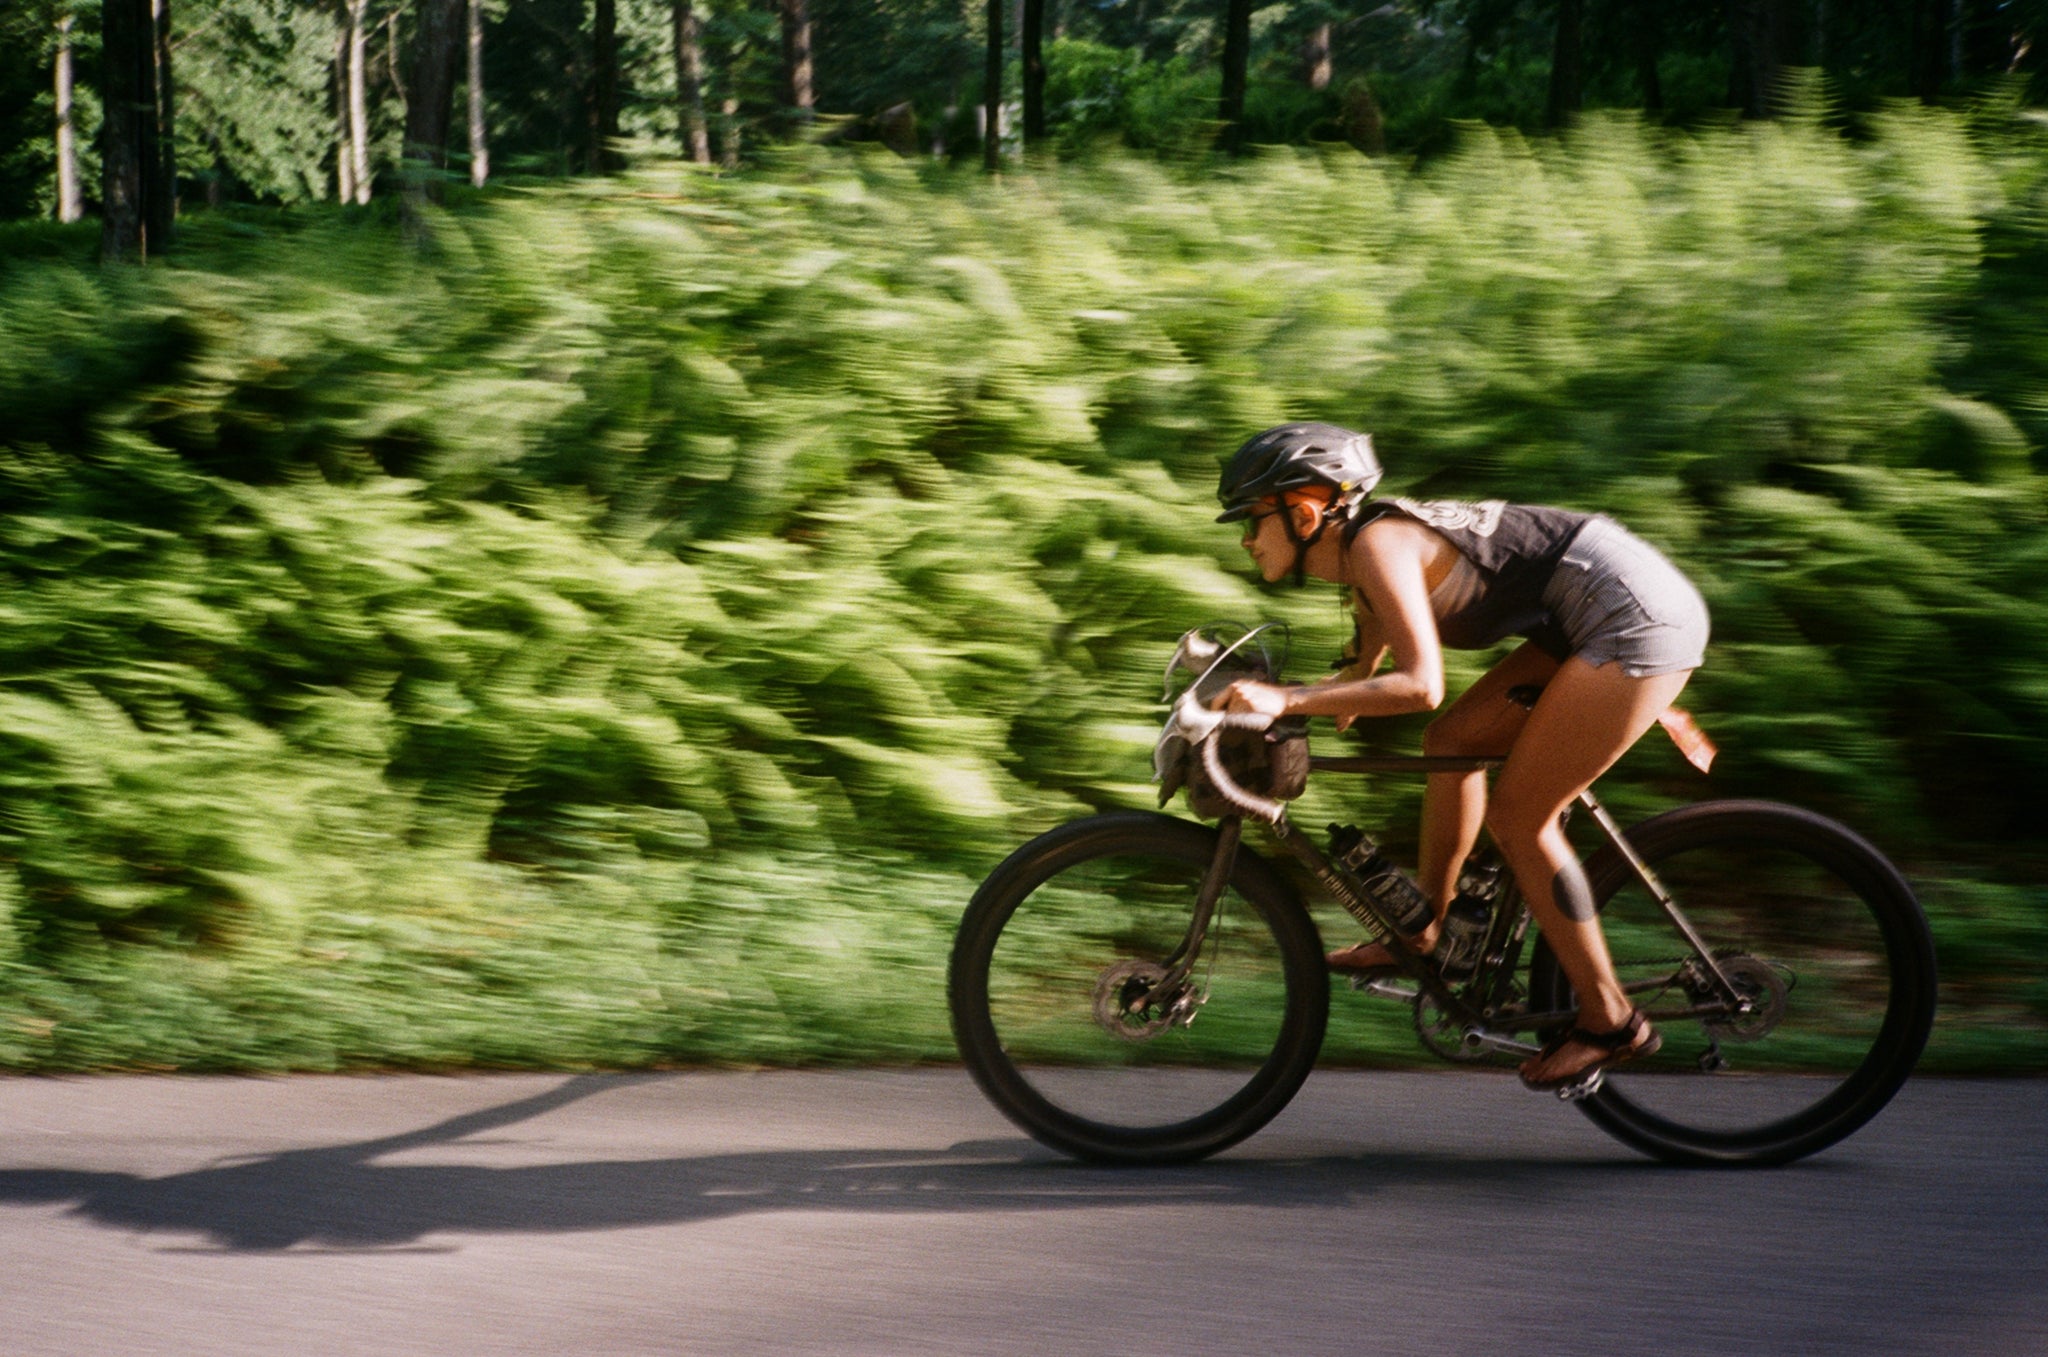 A person crouched on their bike, going fast